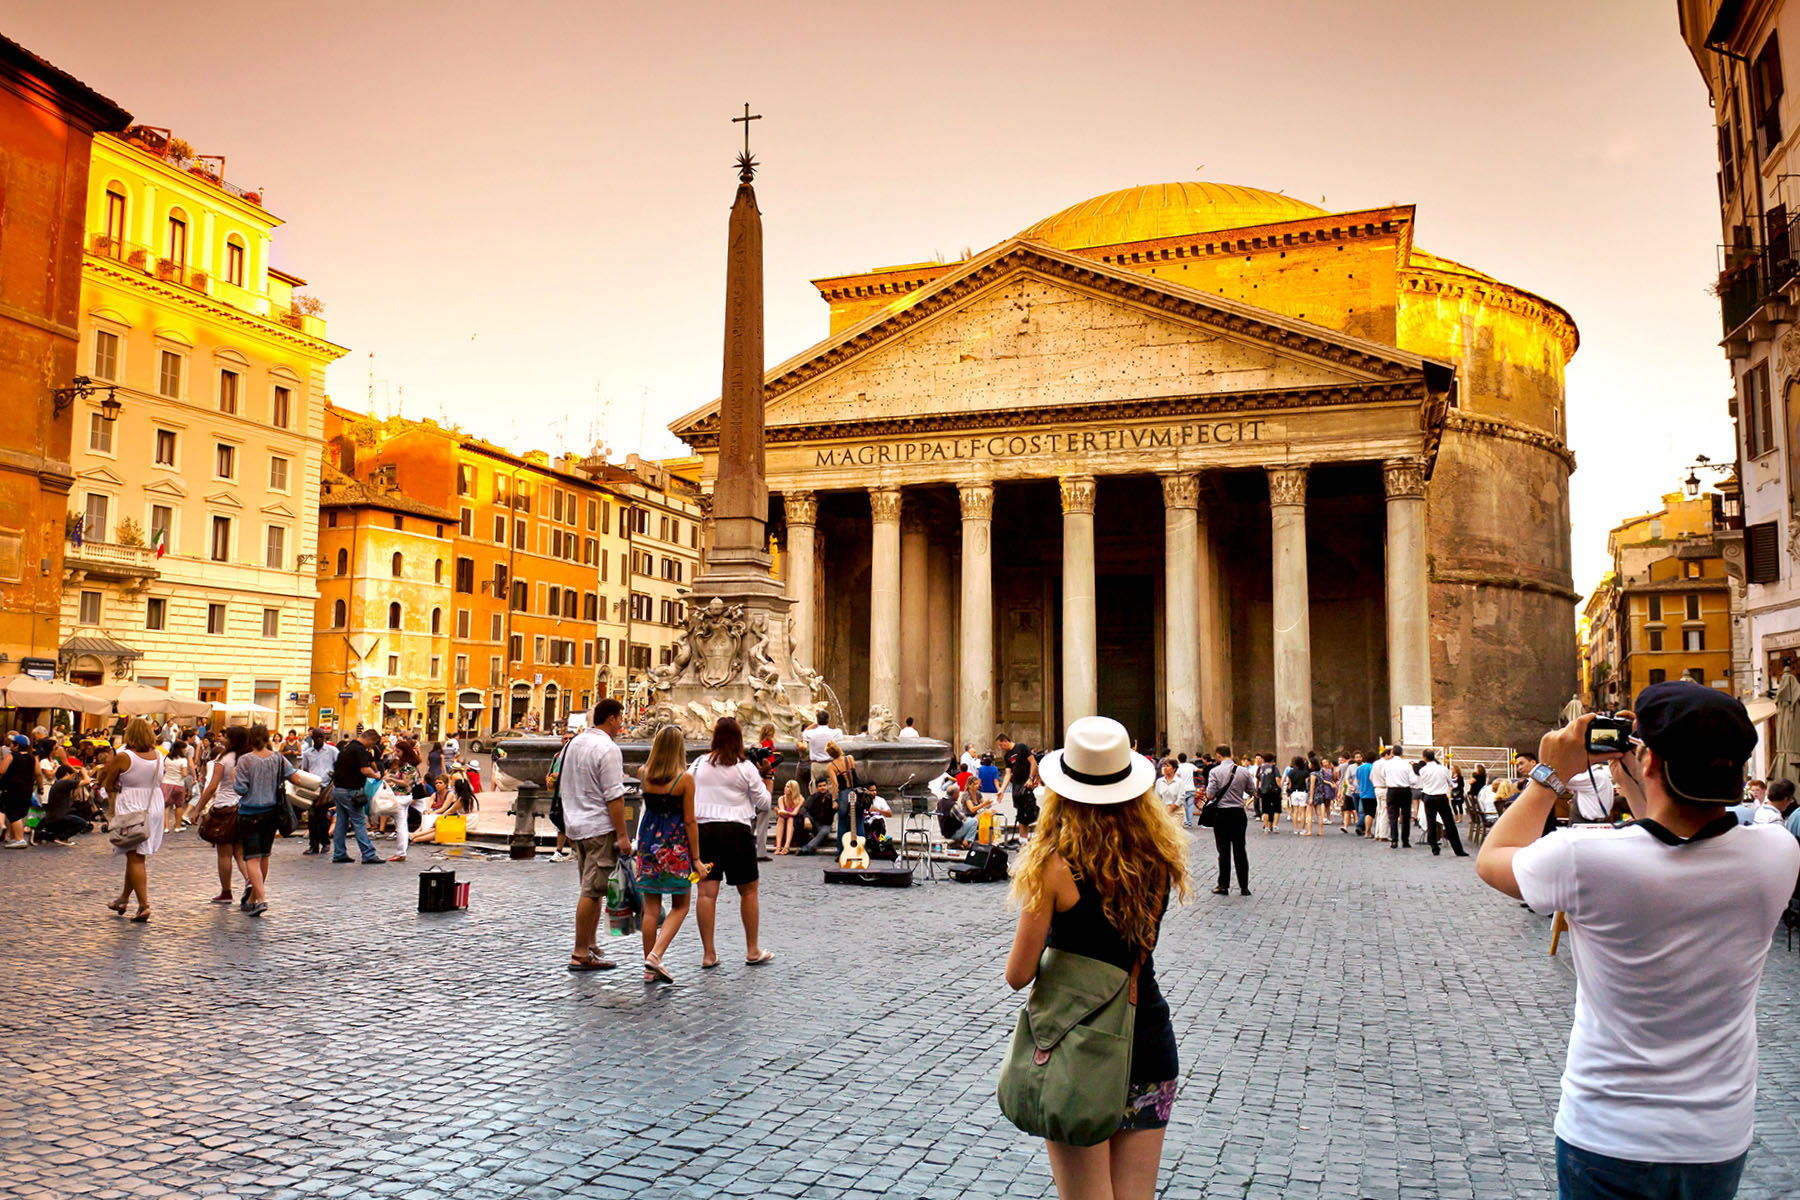 The beauty and brilliance of the Pantheon have inspired architects through the ages.